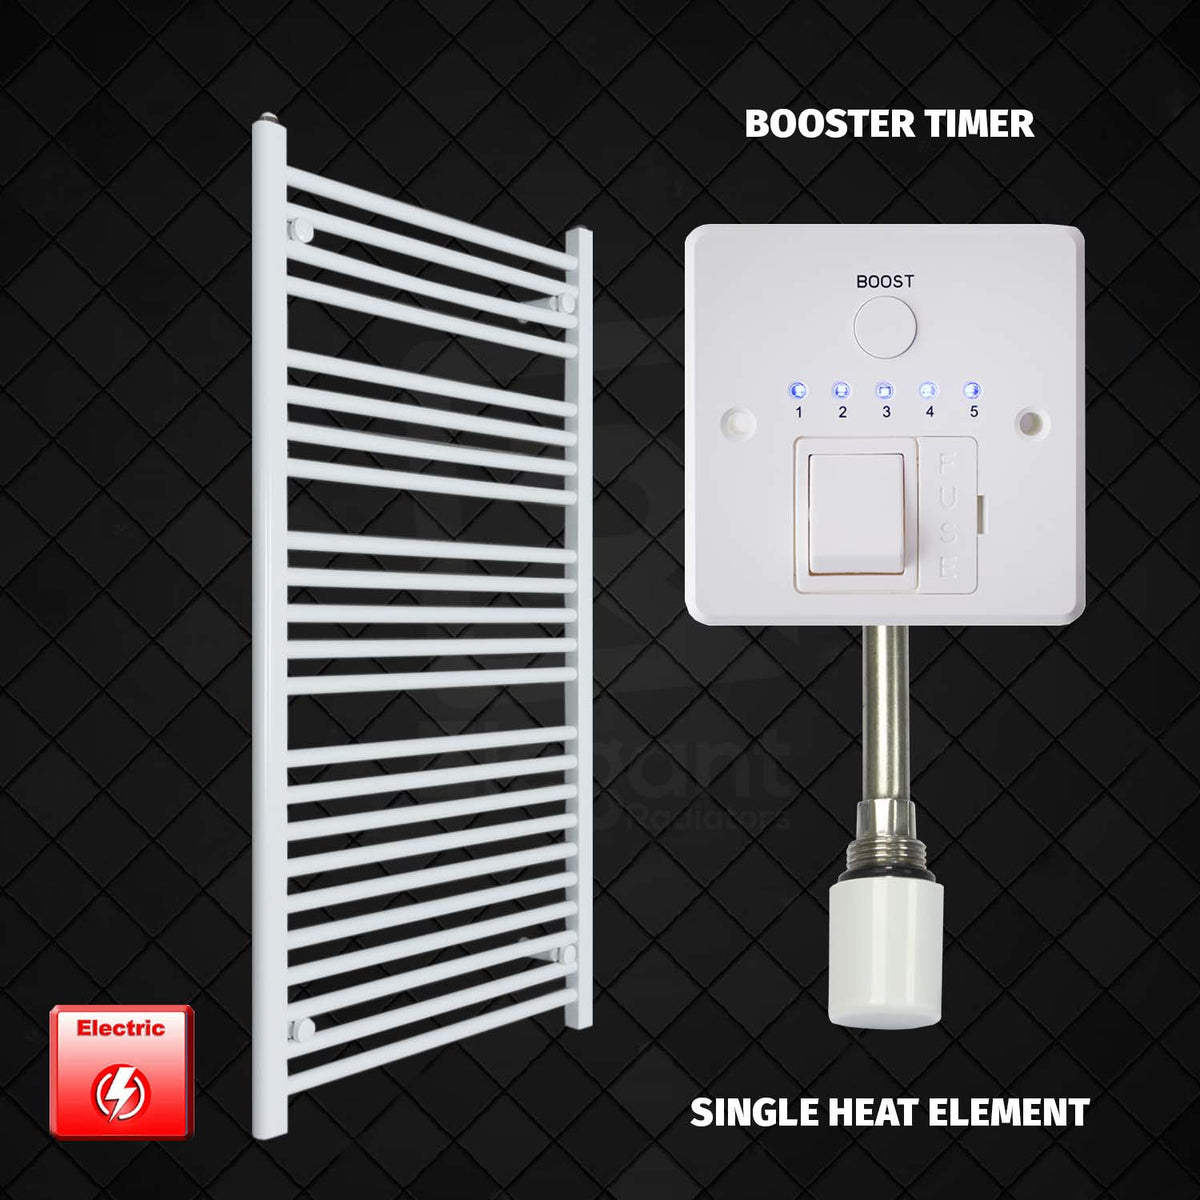 1300 mm High 700 mm Wide Pre-Filled Electric Heated Towel Rail Radiator White HTR Single heat element Booster timer